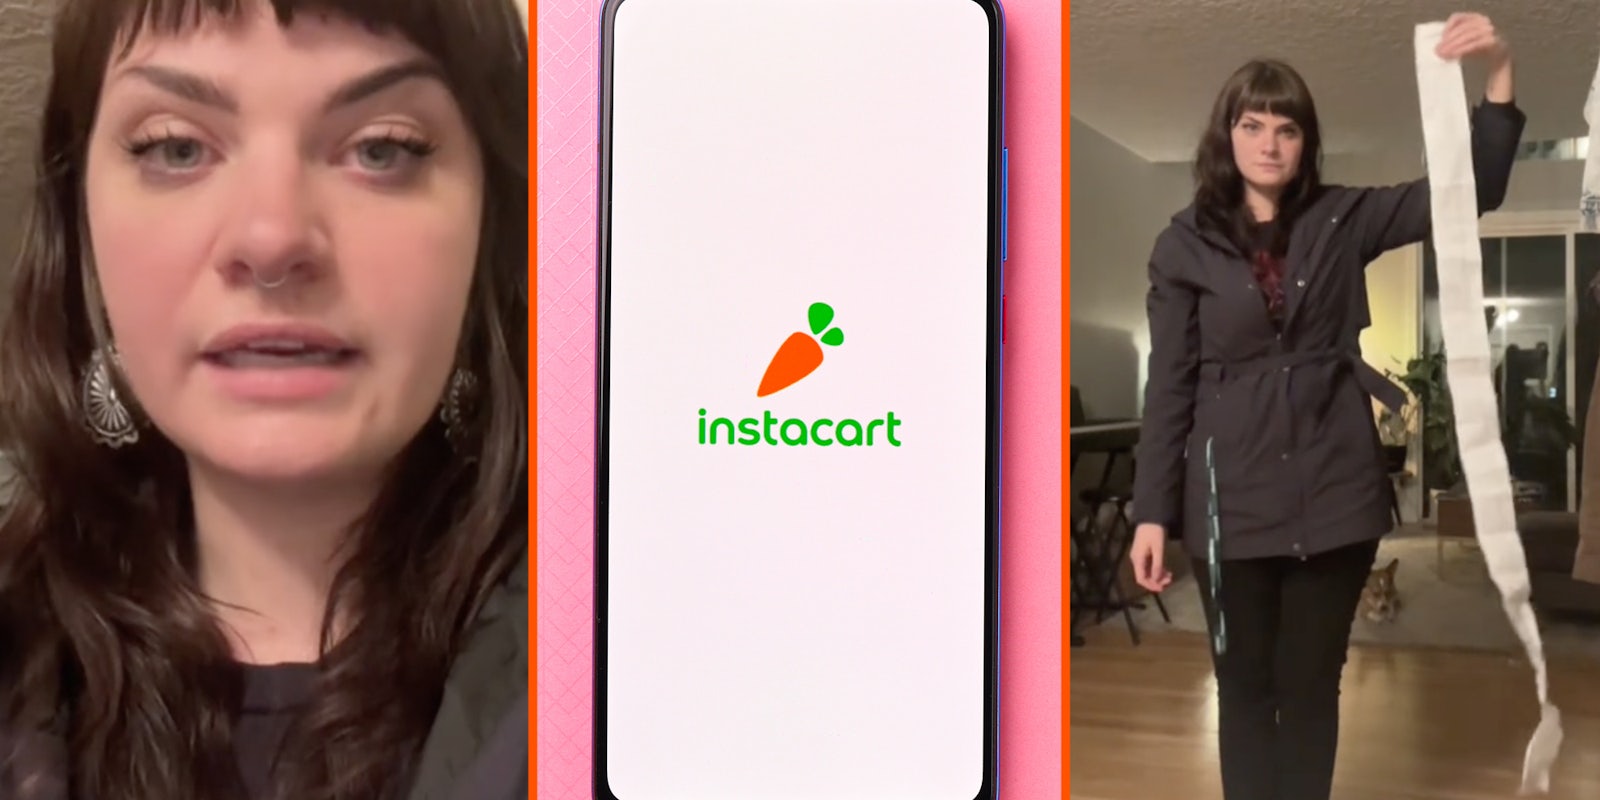 Woman talking(l), Phone with instacart app open(c), Woman with long receipt(r)